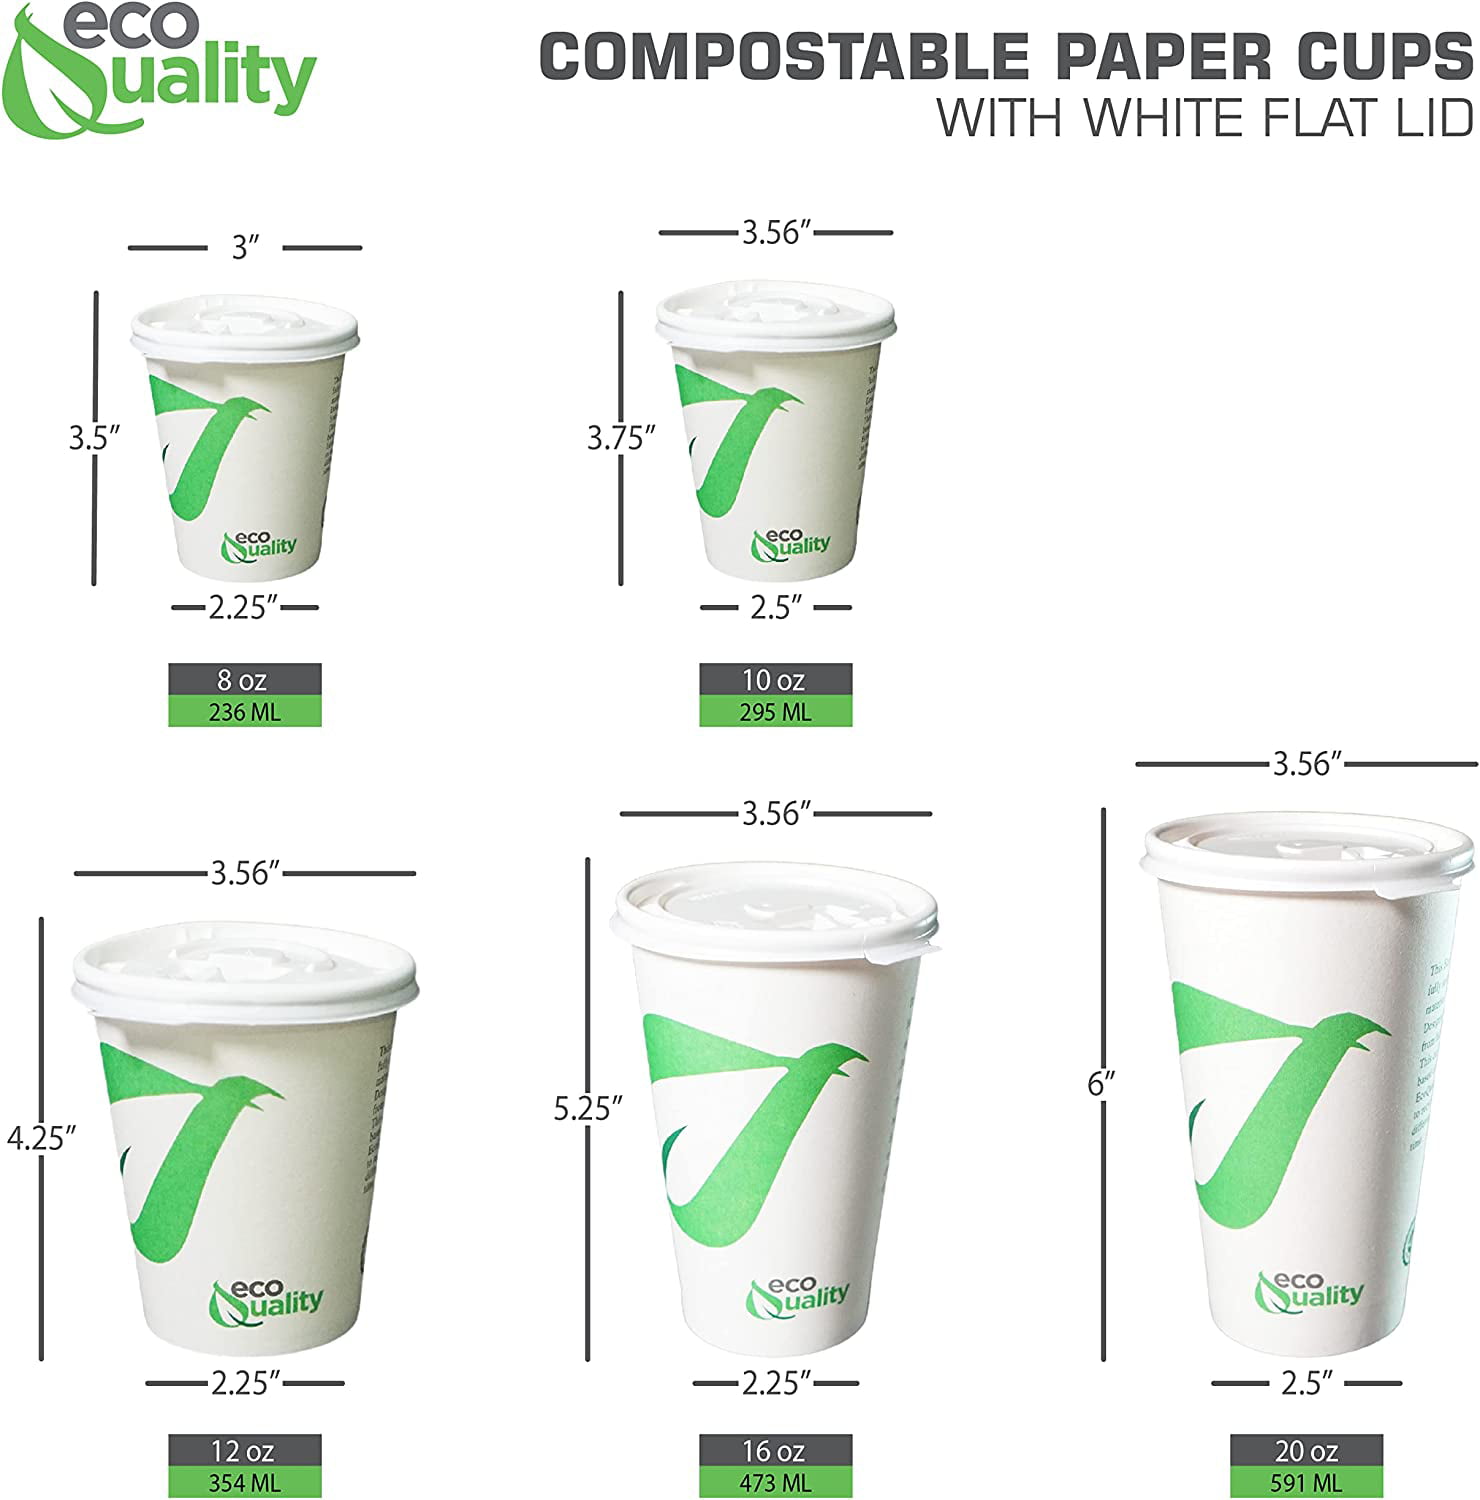 8 oz. Holiday Recyclable Paper Cup - Sip, Sit, & Stay (Green)